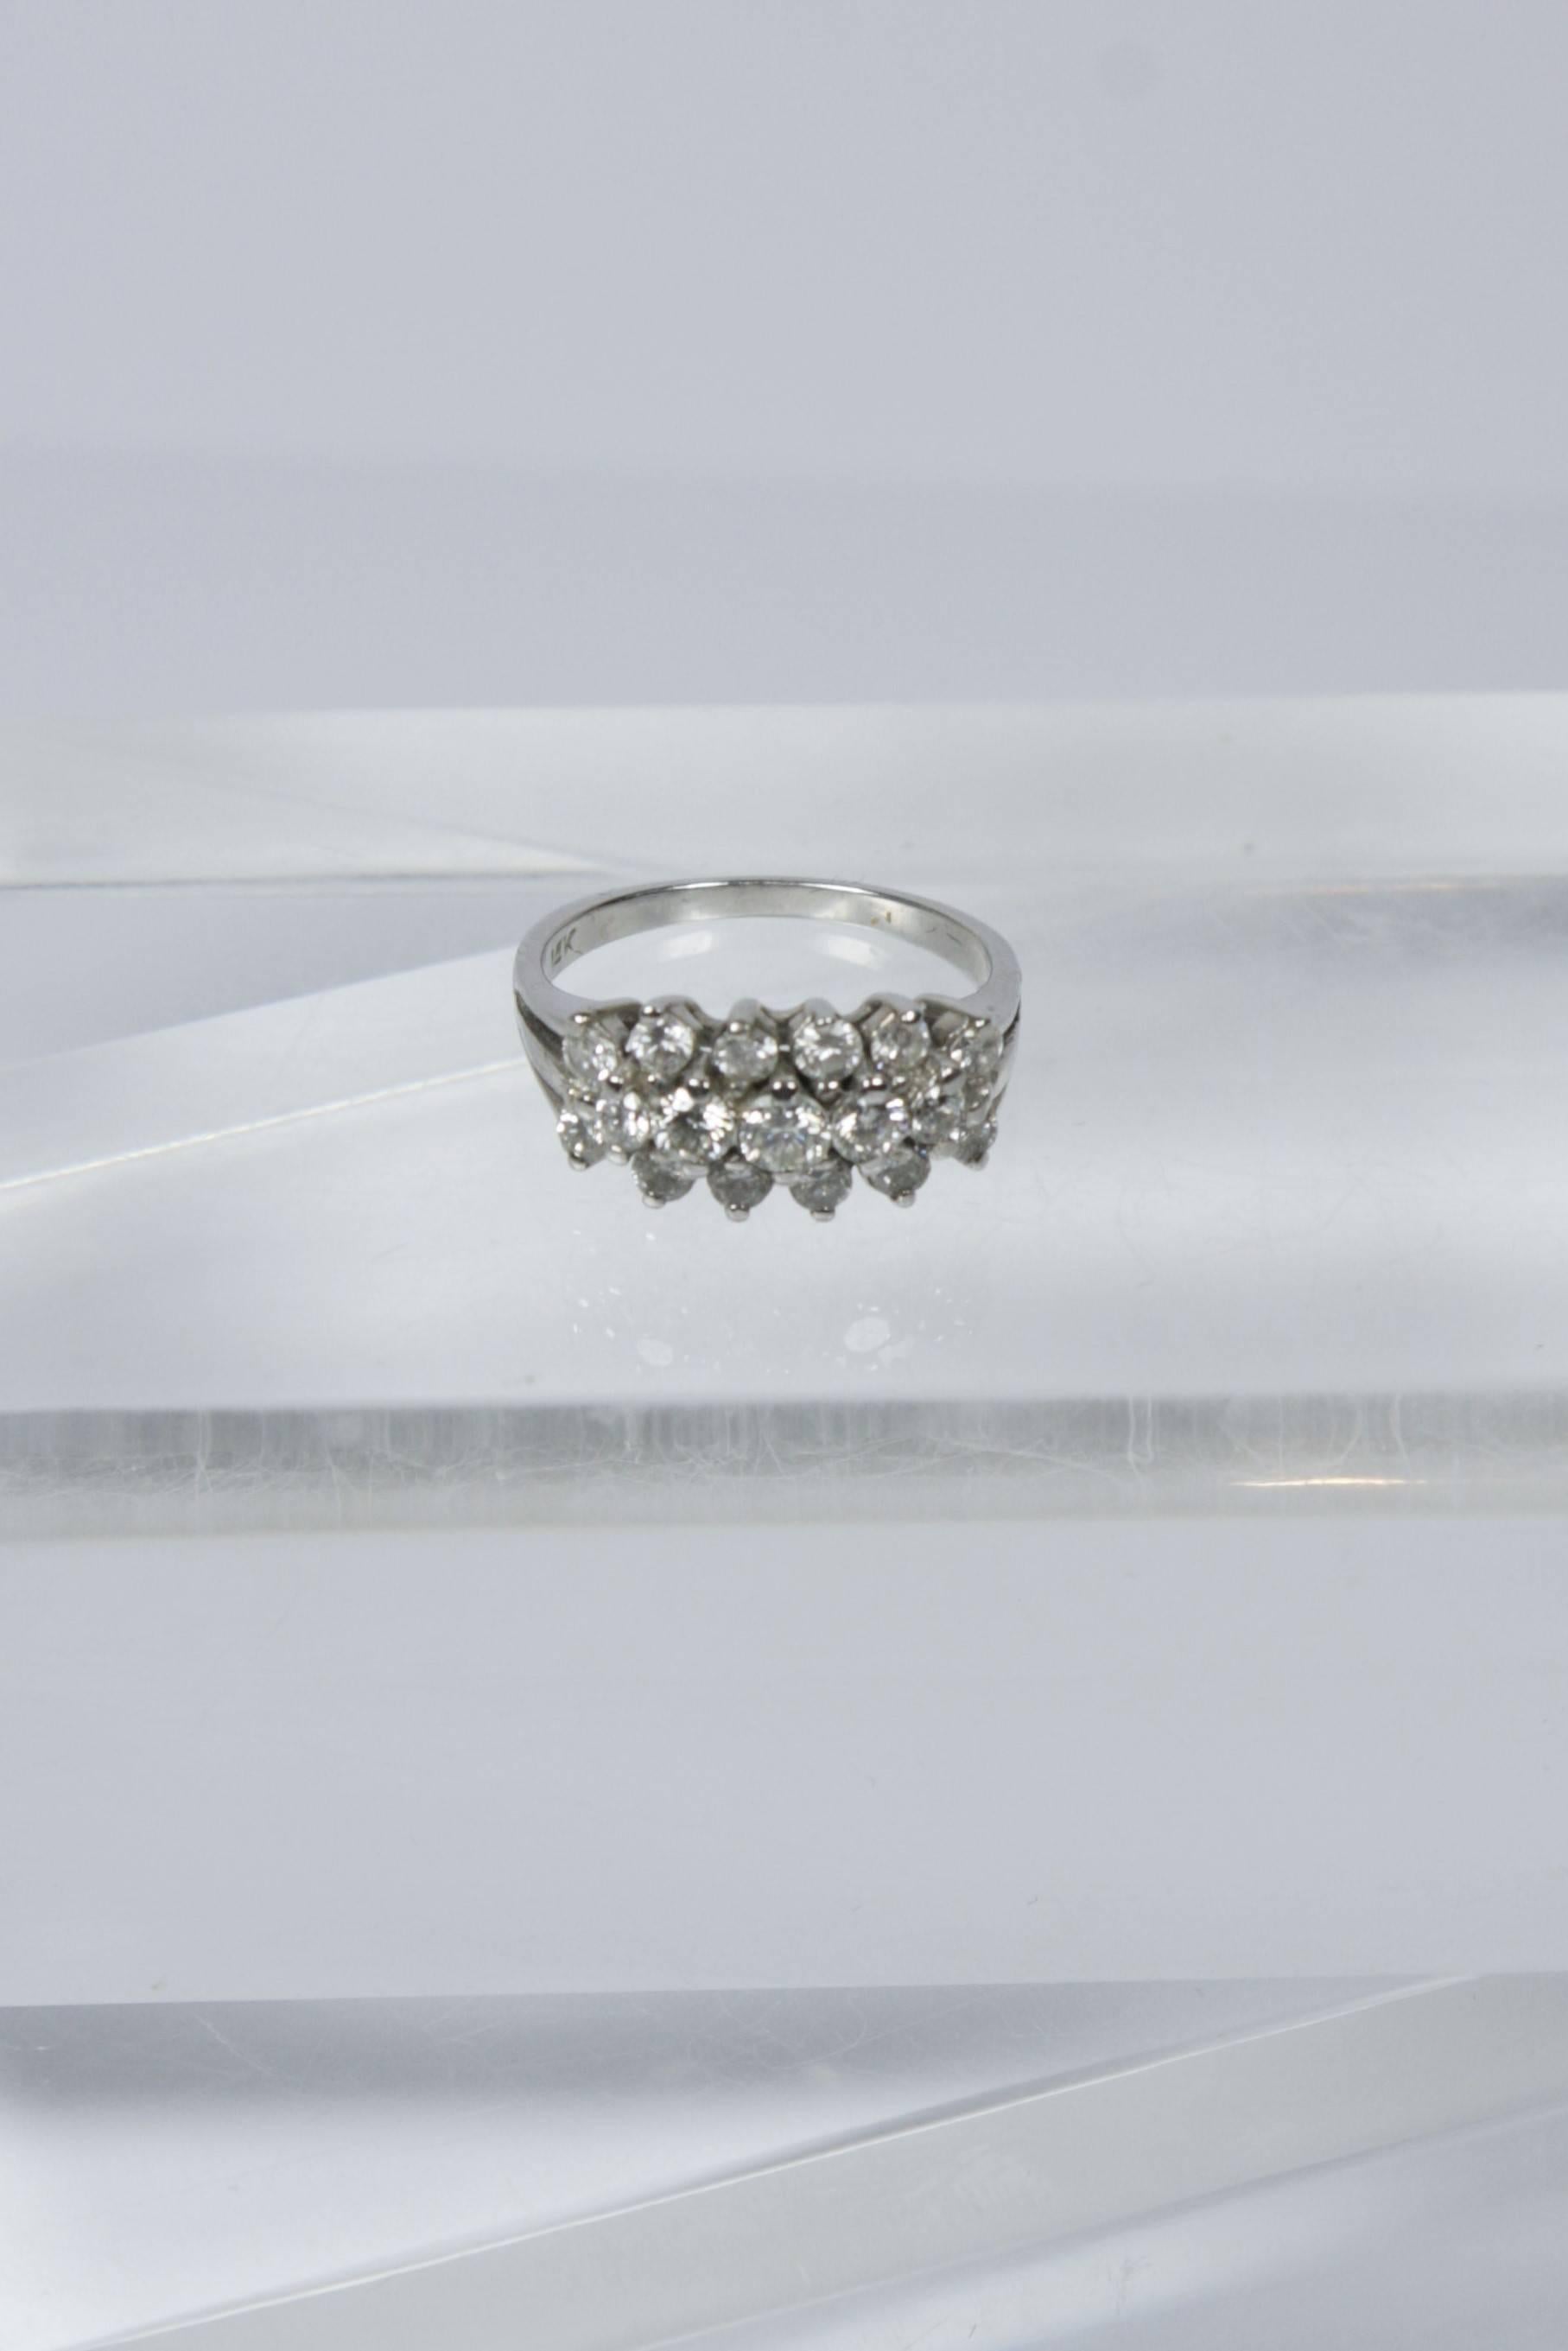 This vintage ring is available through The Paper Bag Princess of Beverly Hills. The ring is composed of 14kt white gold with three rows of diamonds. 

Specs: 
14 KT White Gold 
Size 5.5 
(Can easily be sized)